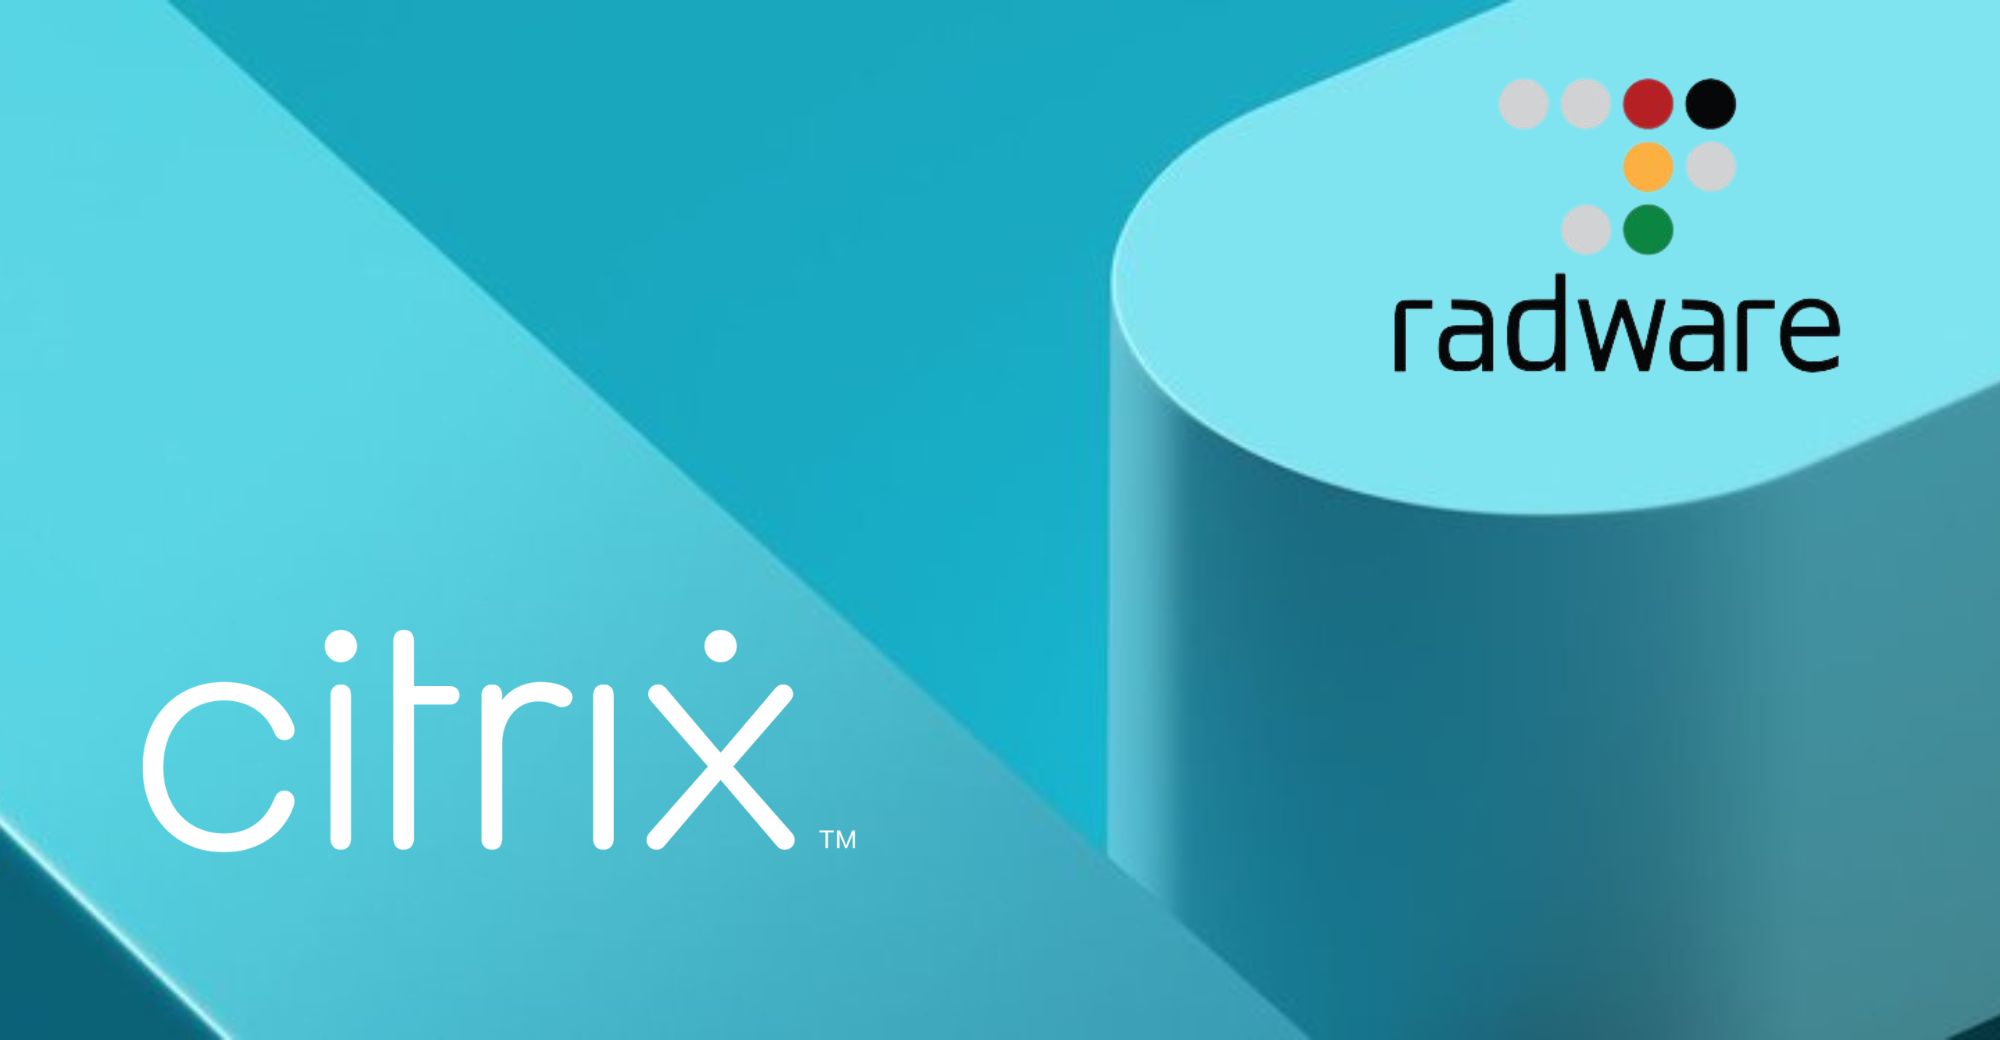 Citrix and Radware Reportedly to Withdraw from the Chinese Market